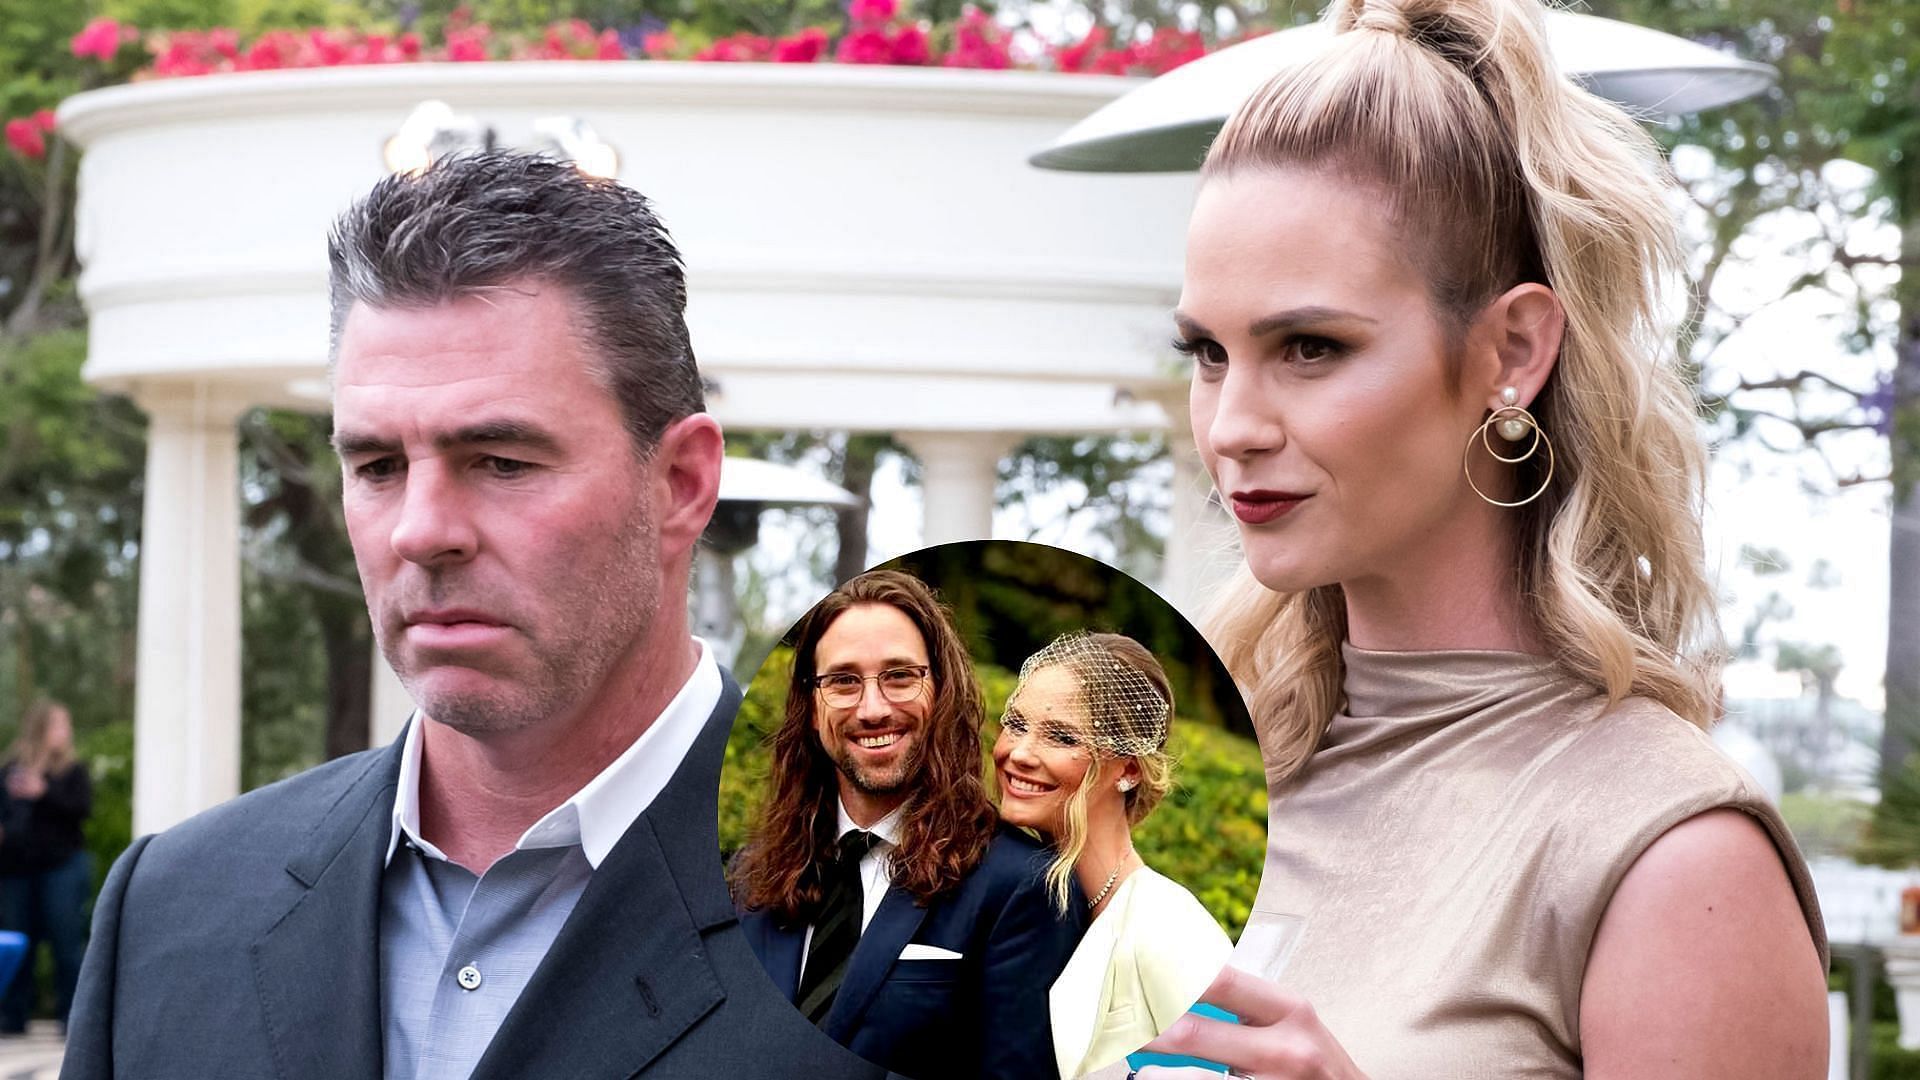 I thought it was a joke” - Former MLB All-Star Jim Edmonds was once shocked  by the news of his ex-wife Meghan King marrying President Joe Biden's nephew